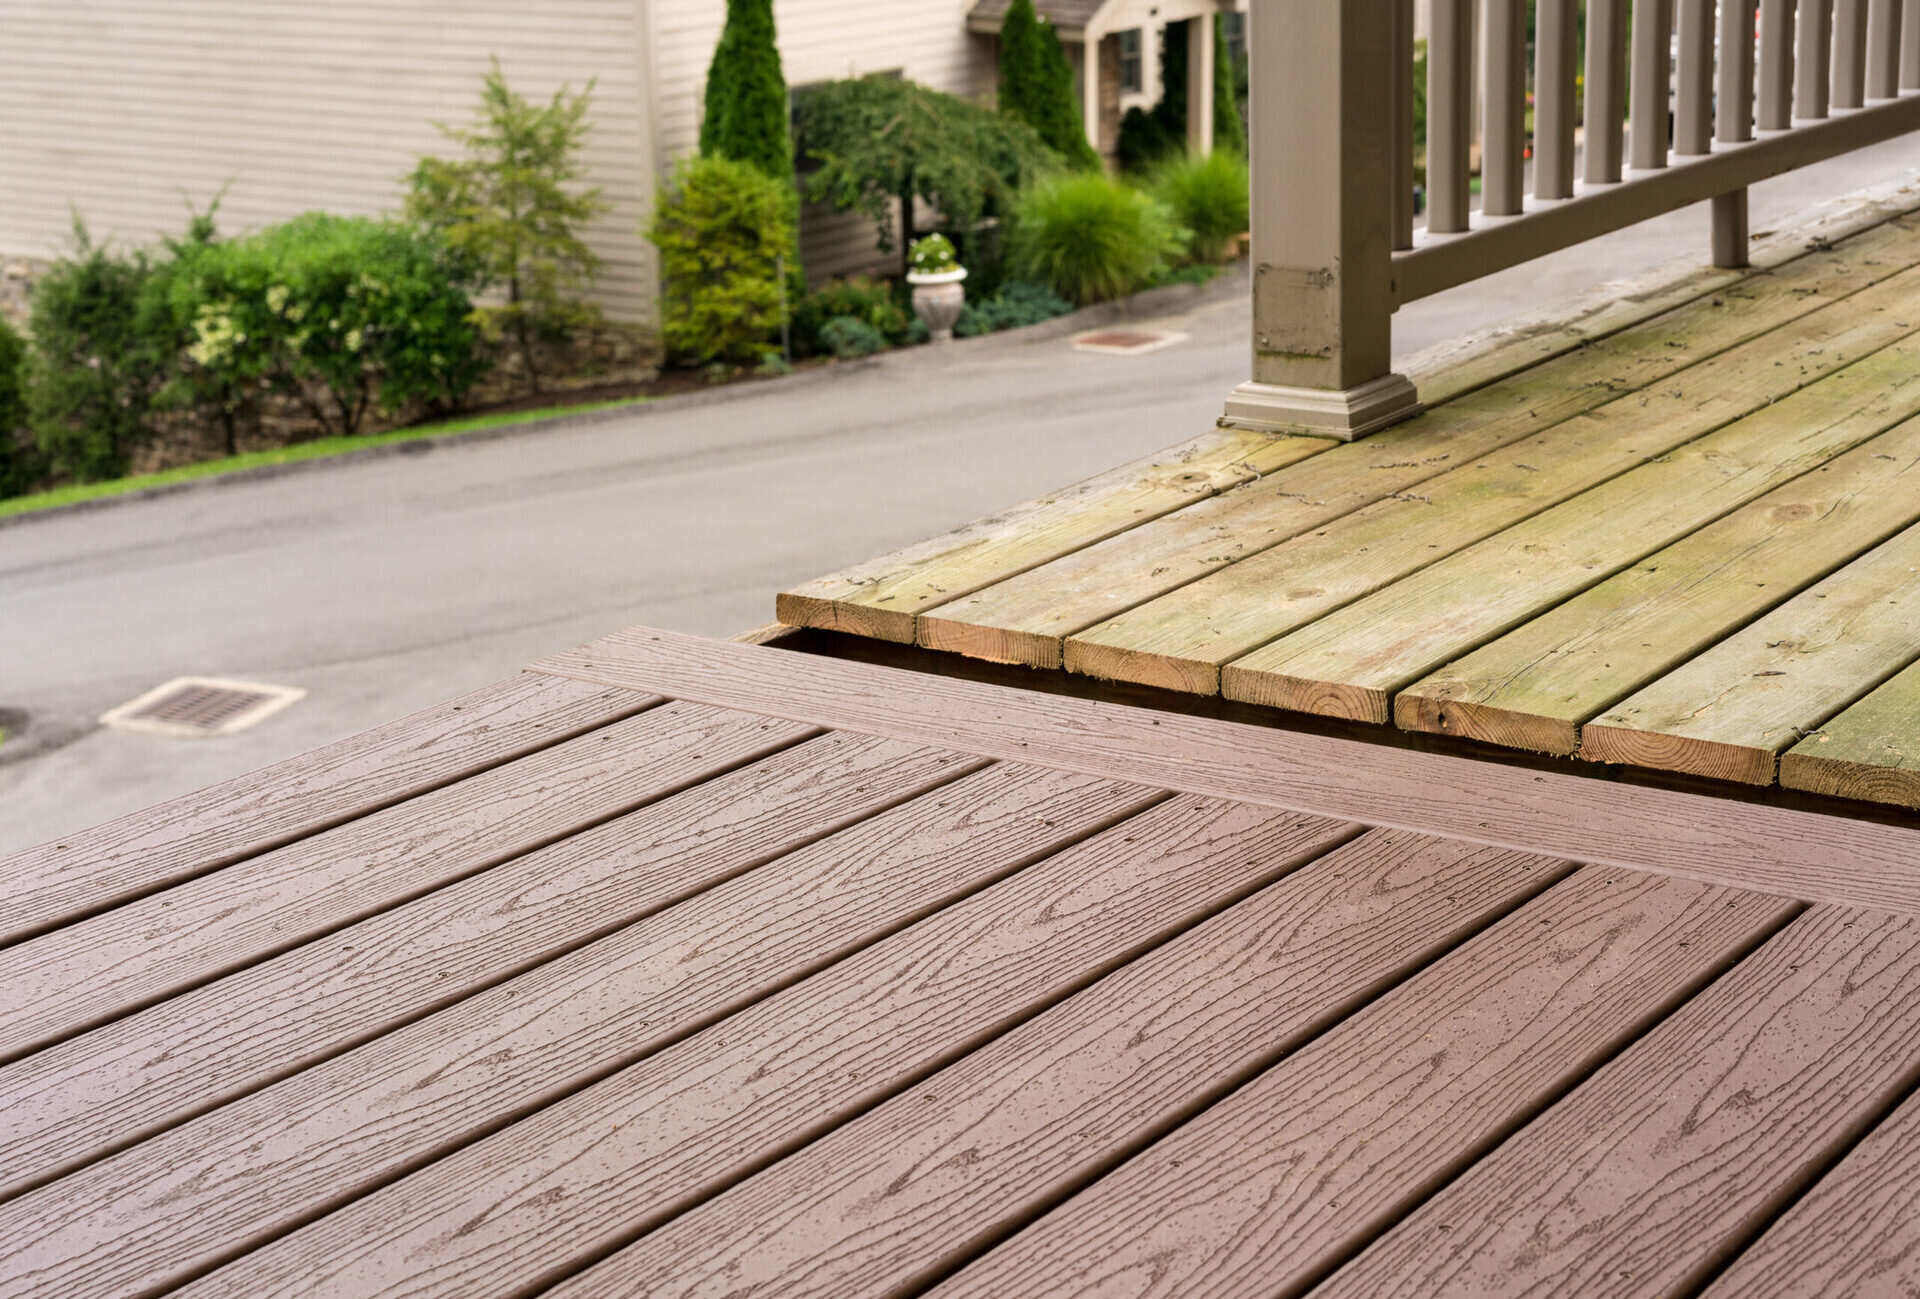 Which Is Better: Trex Or Composite Decking?